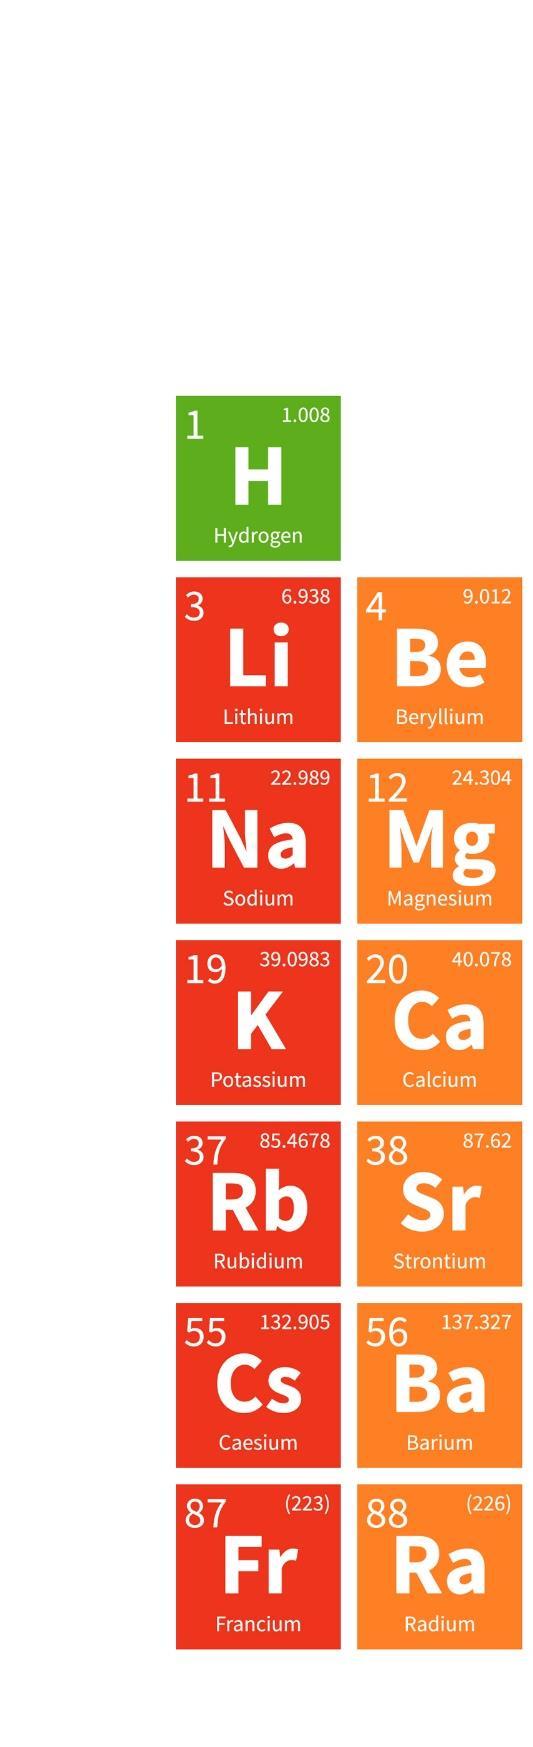 s-block elements s-ब ल क क र त व All elements of the s-block are metals.